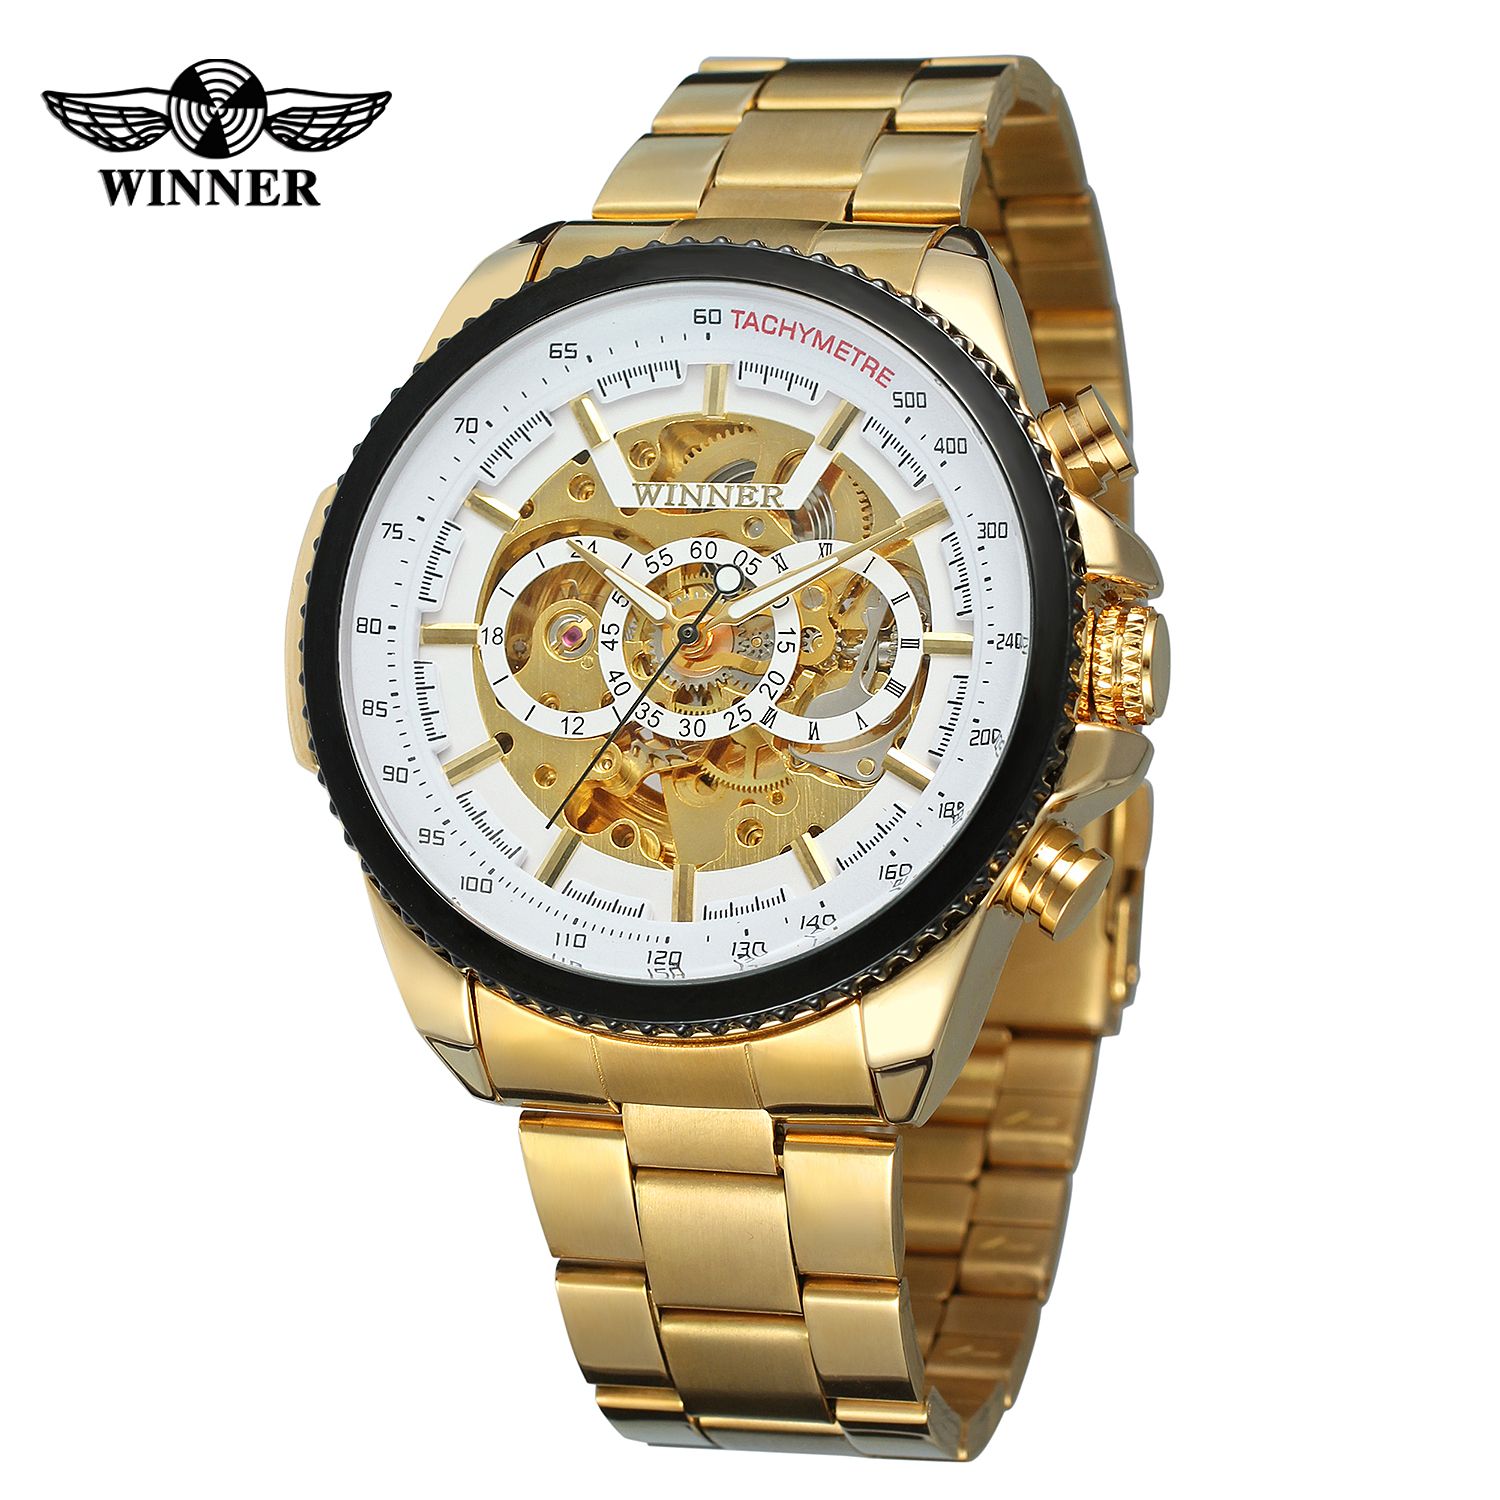 Winner Business Automatic Mechanical Luxurious Movement Analog Watch Automatized See Through Glass Back Self Winding Wrist Pulses Highlighted For Men